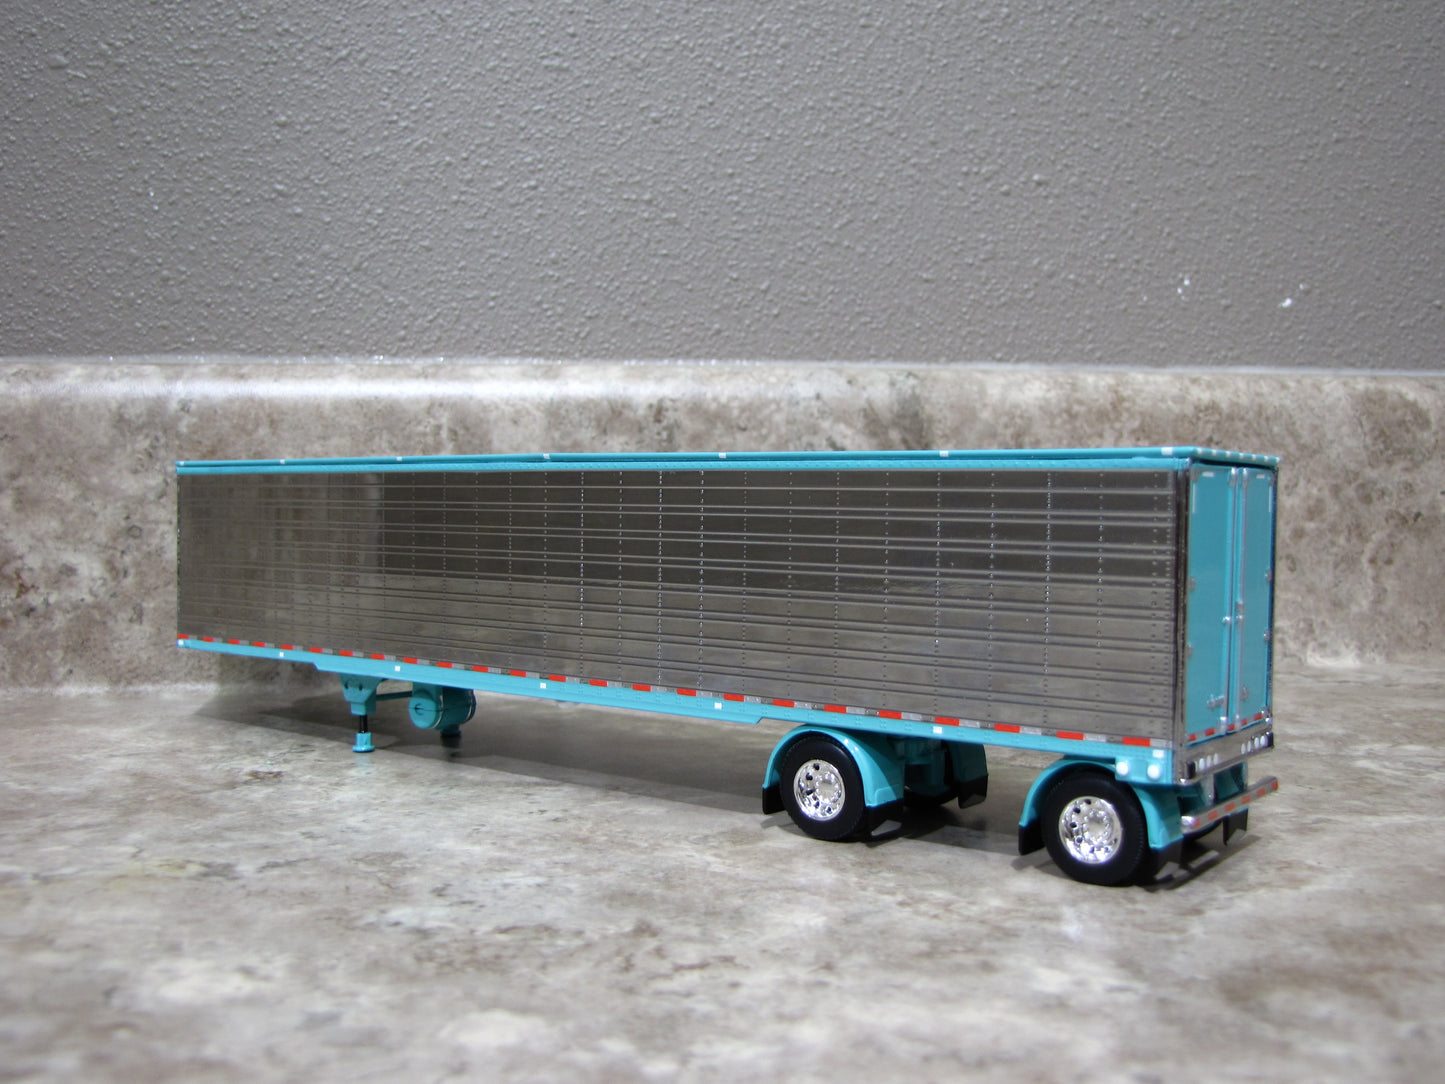 TRL 1732 Chrome Teal Utility Refrigerated Spread Axle Trailer